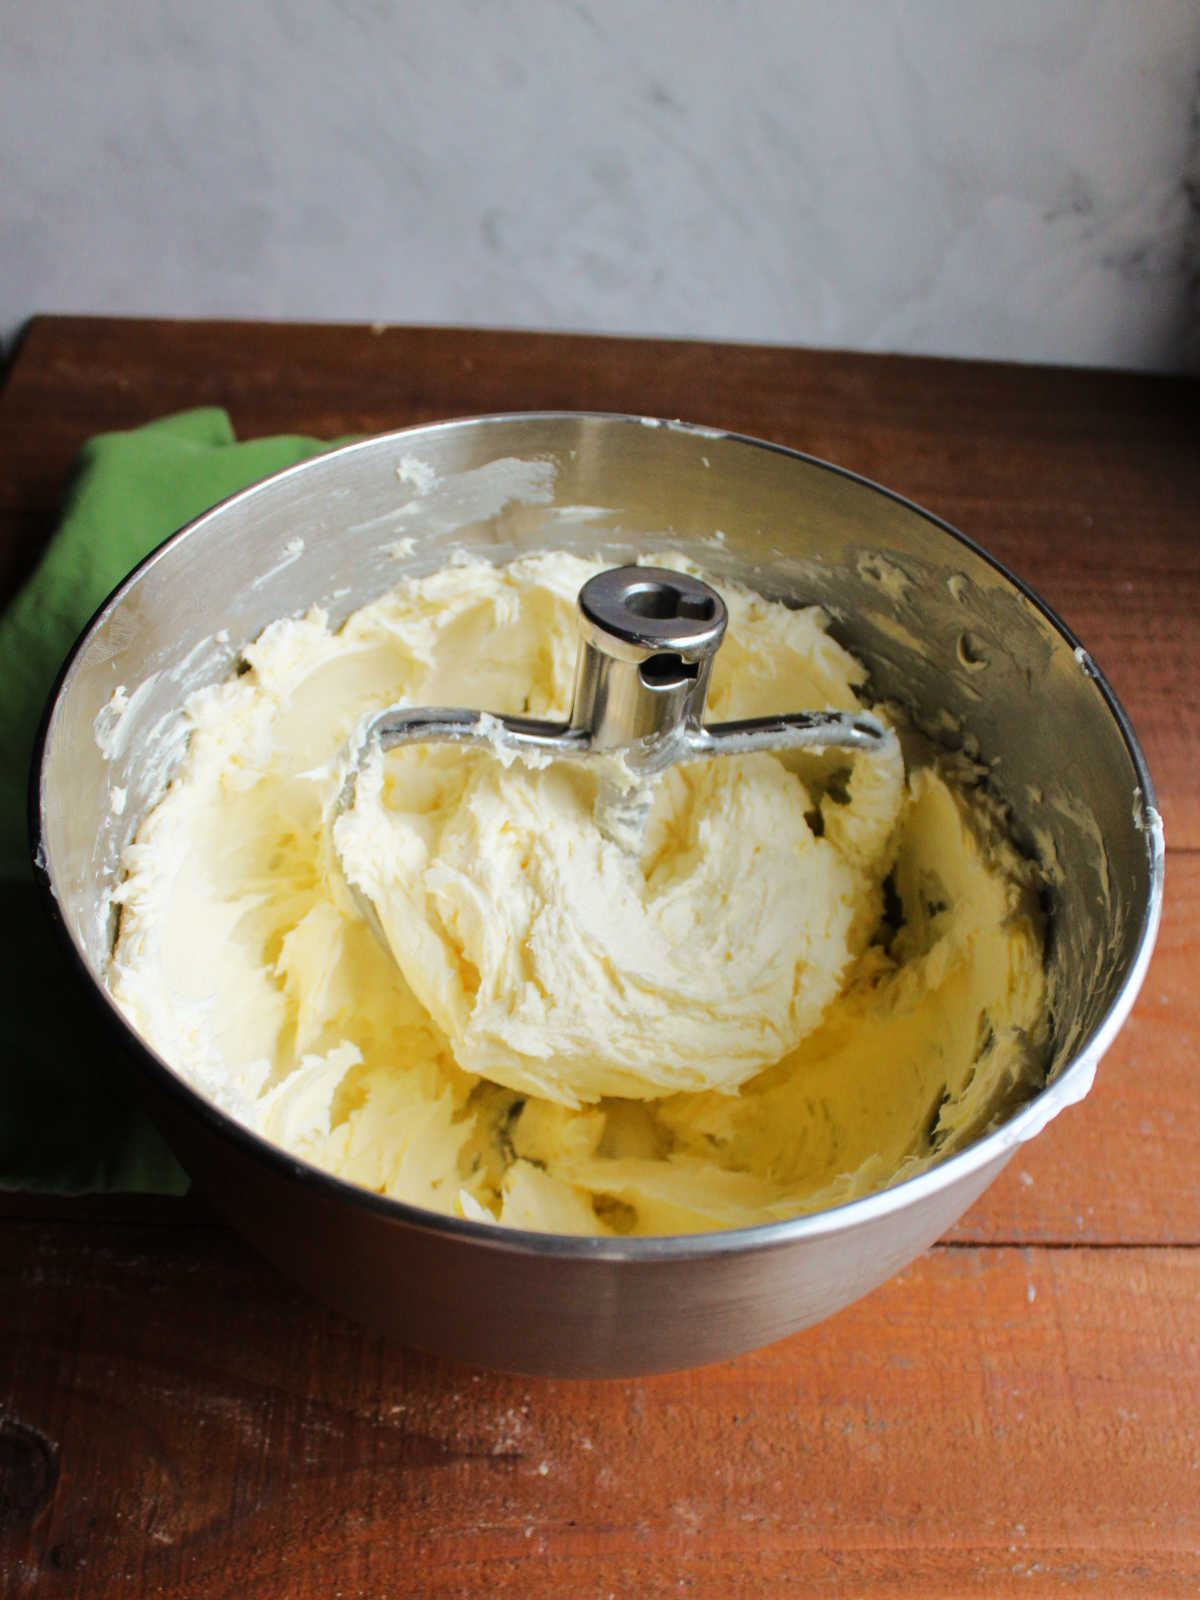 Mixer bowl with whipped butter and cream cheese inside.